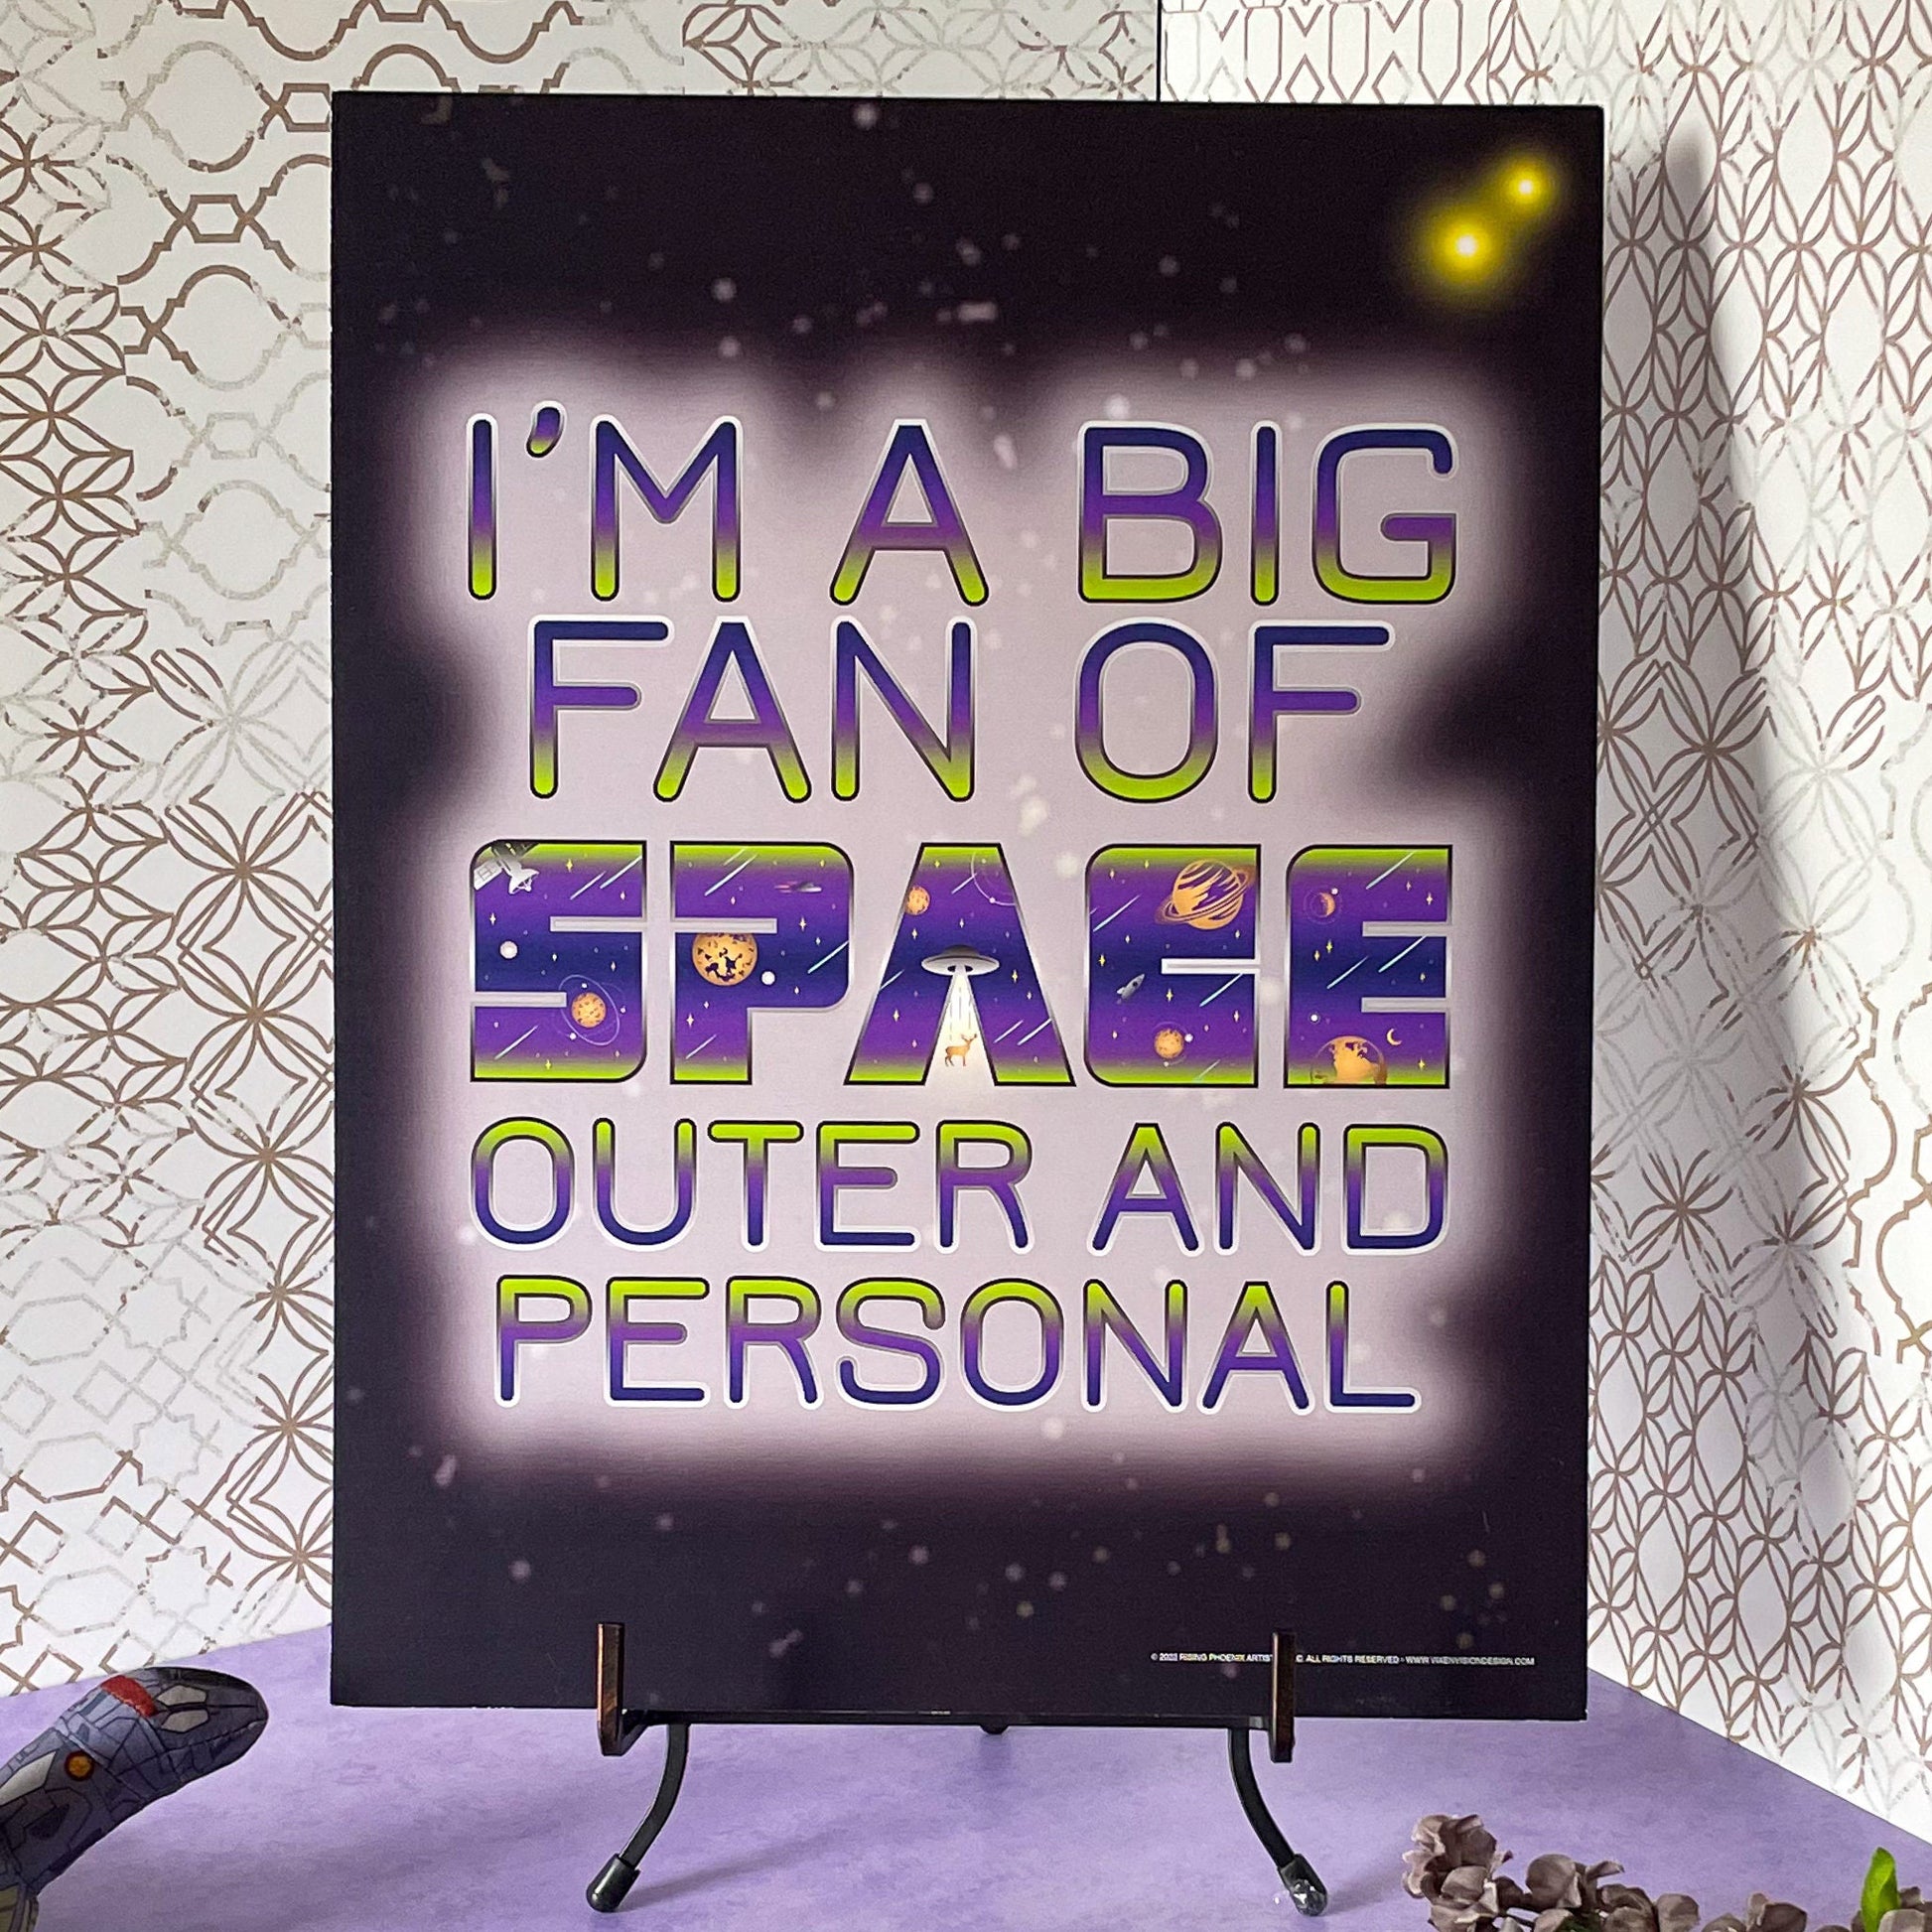 Big Fan of Space - Outer and Personal 11x14 Art Poster on stand